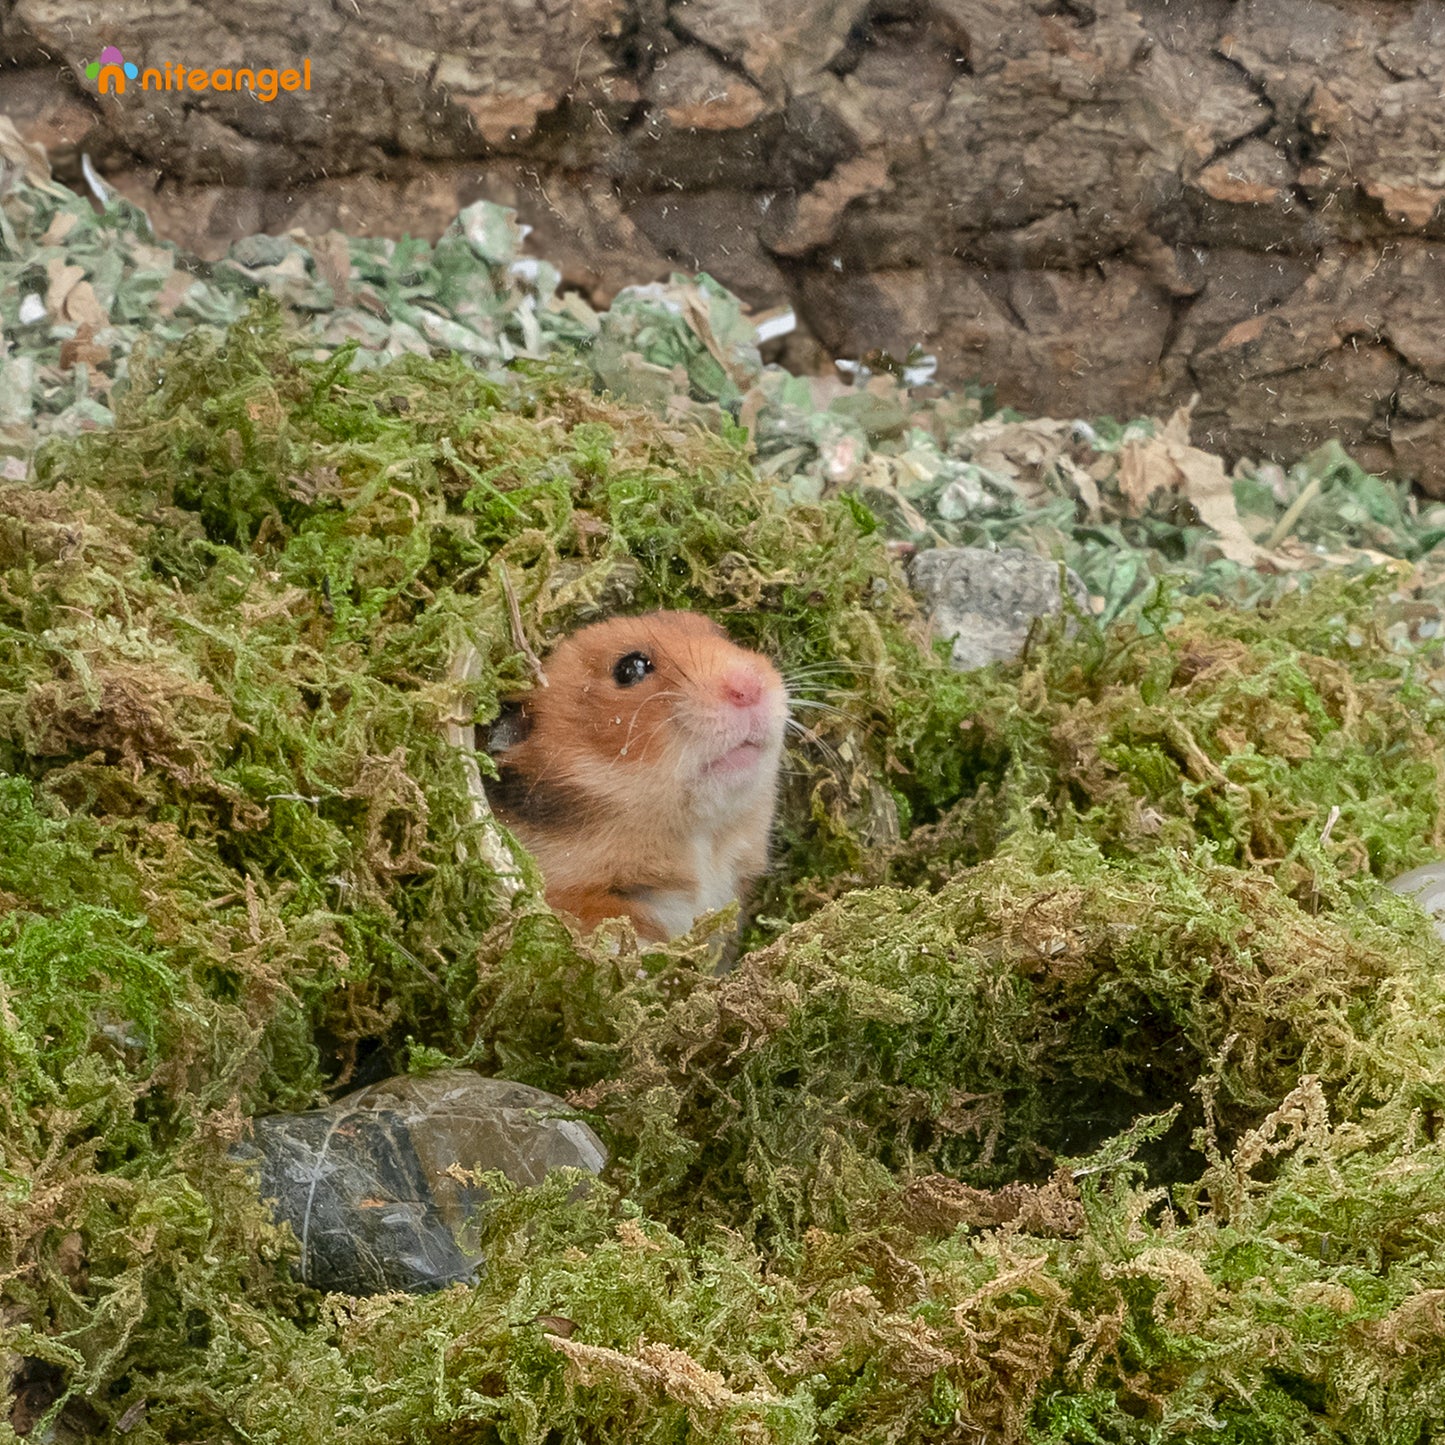 Niteangel 5L Forest Moss Soft Natural Moss Bedding Nesting for Dwarf Syrian Hamsters, Gerbils, mices, Degus or Other Small Animal